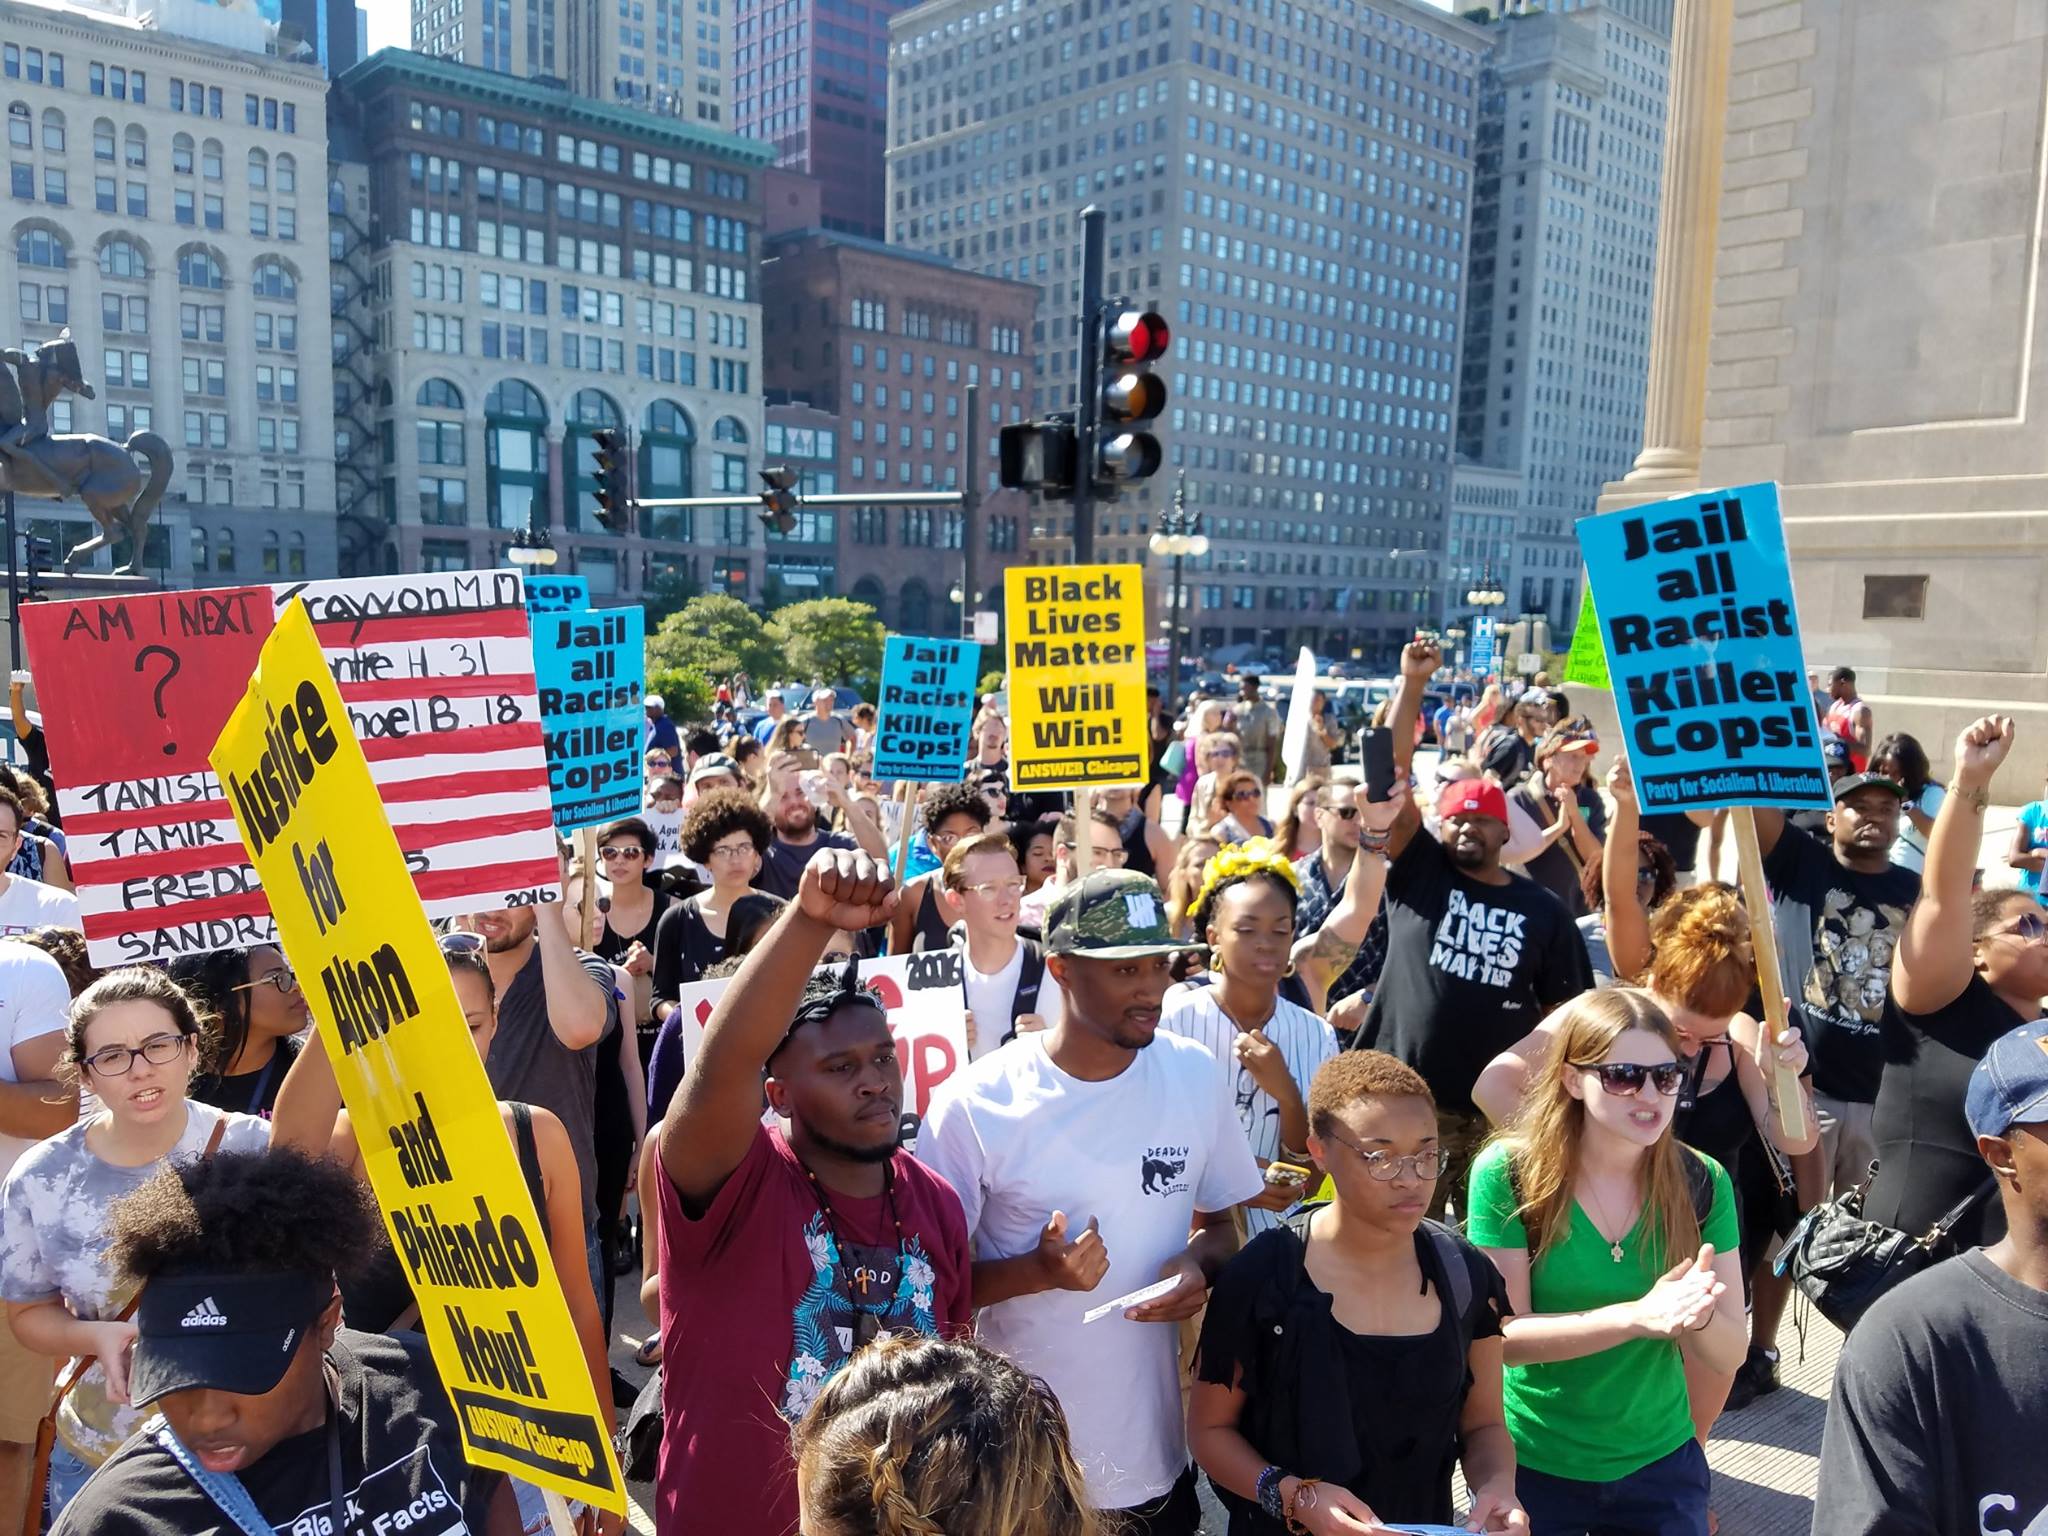 Protest against police killings in Chicago, July 2016